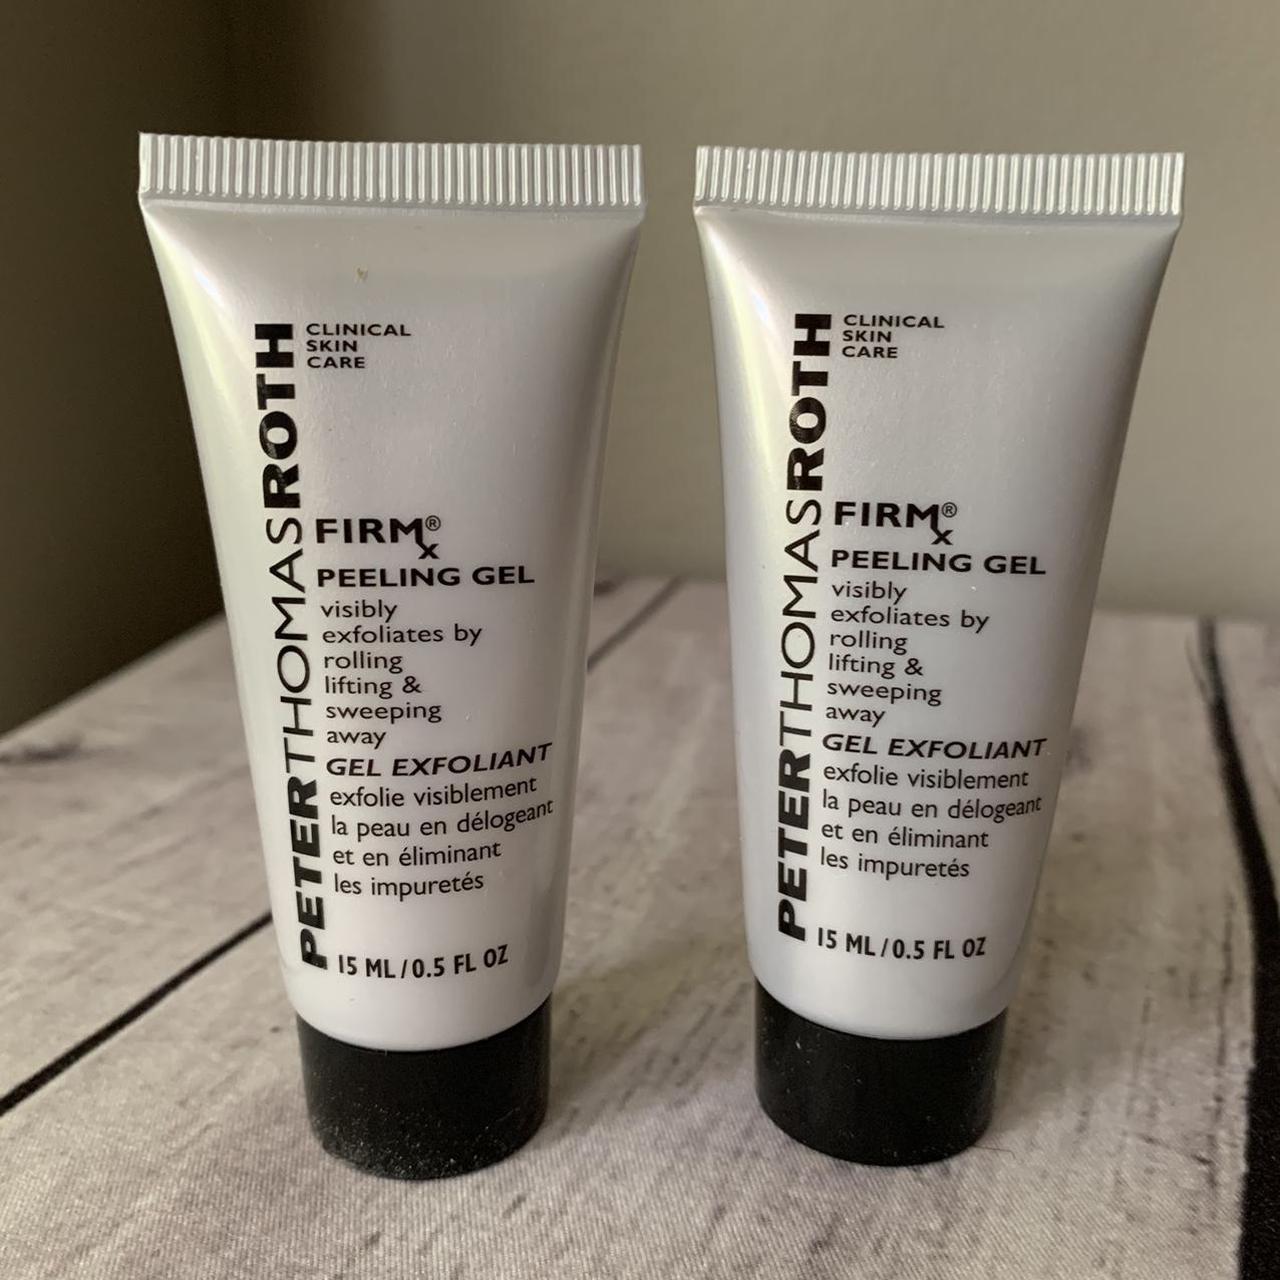 Product Image 1 - 2 Peter Thomas Roth FirmX